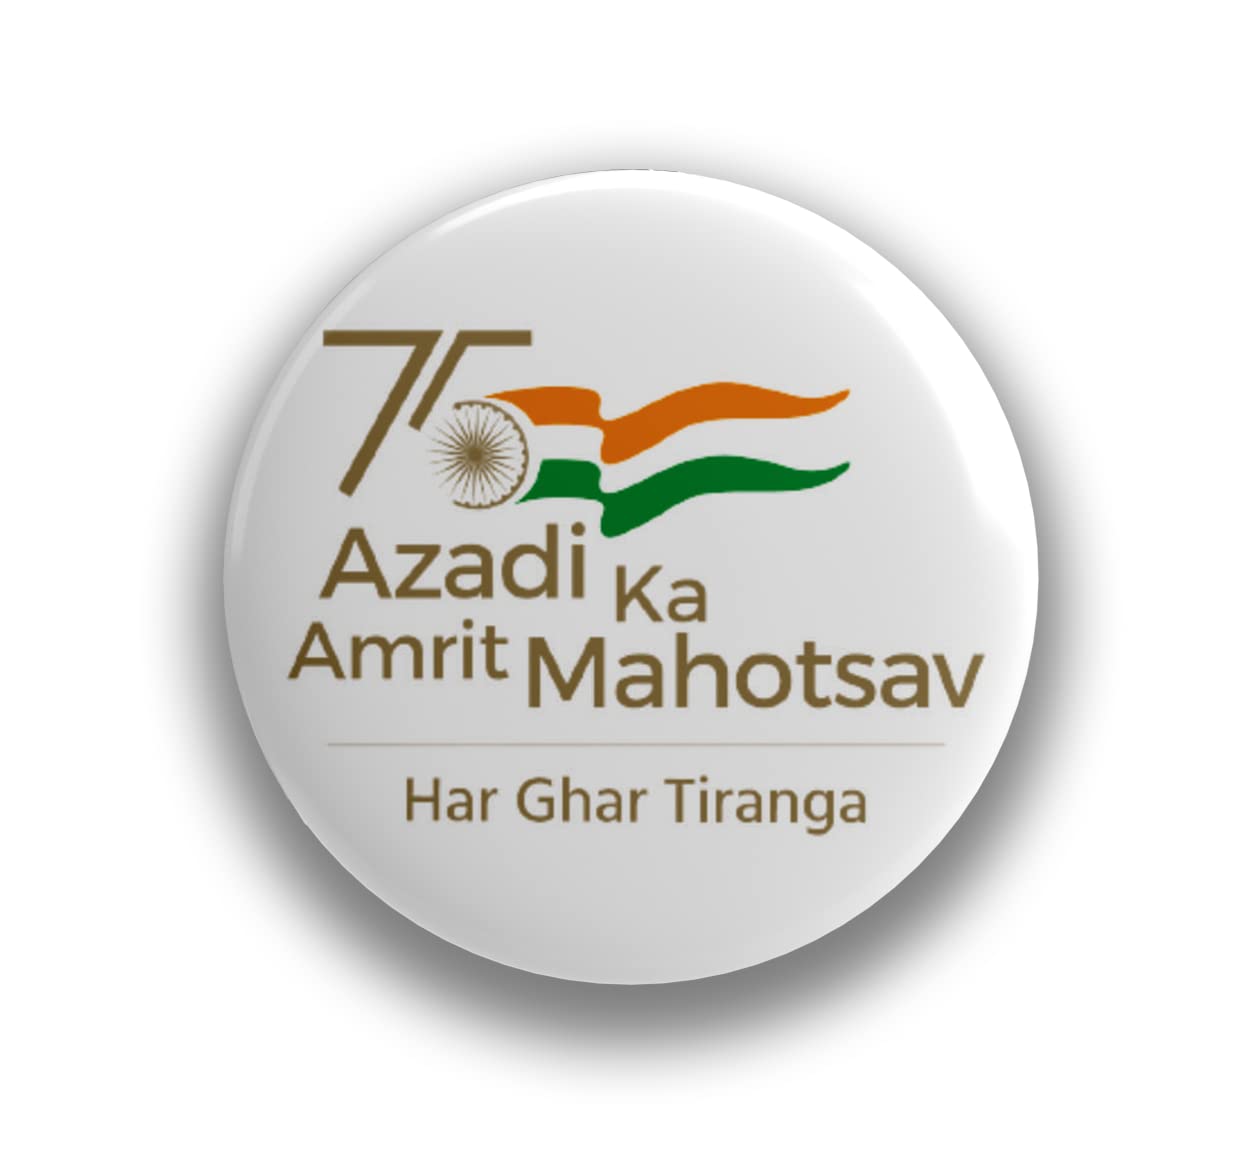 Buy Nivara's | 75th Azadi Ka Amrit Mahotsav | Har Ghar Tiranga Badges |  India 75th Independence Badges | India Independence Badges (Pack of 1,  Tricolor) Online at Low Prices in India - Amazon.in